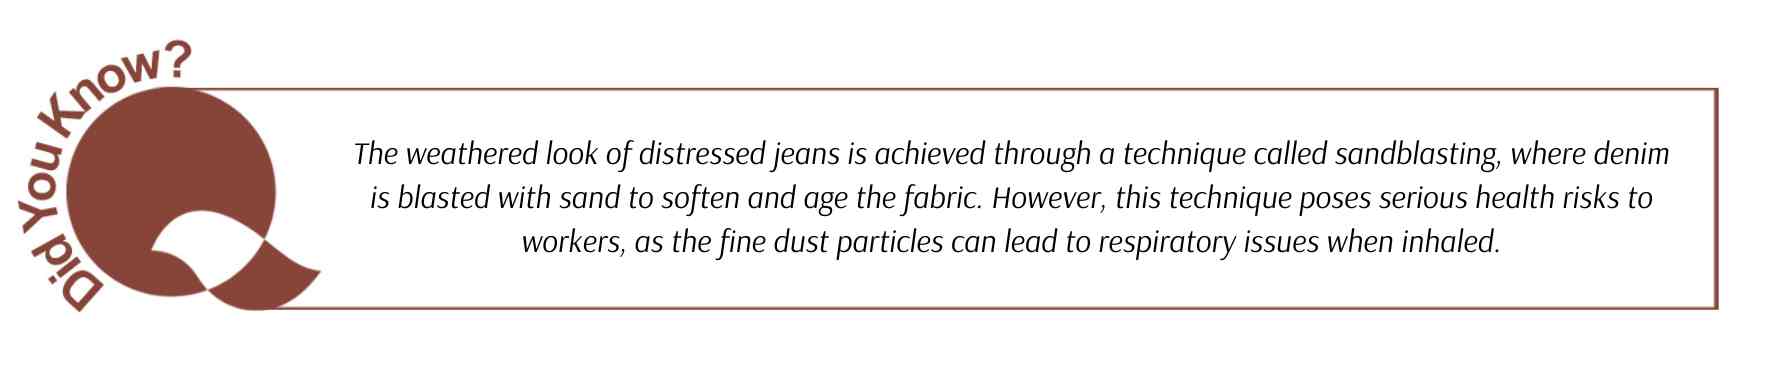 Did you know: The weathered look of distressed jeans is achieved through a technique called sandblasting, where denim is blasted with sand to soften and age the fabric. However, this technique poses serious health risks to workers, as the fine dust particles can lead to respiratory issues when inhaled.